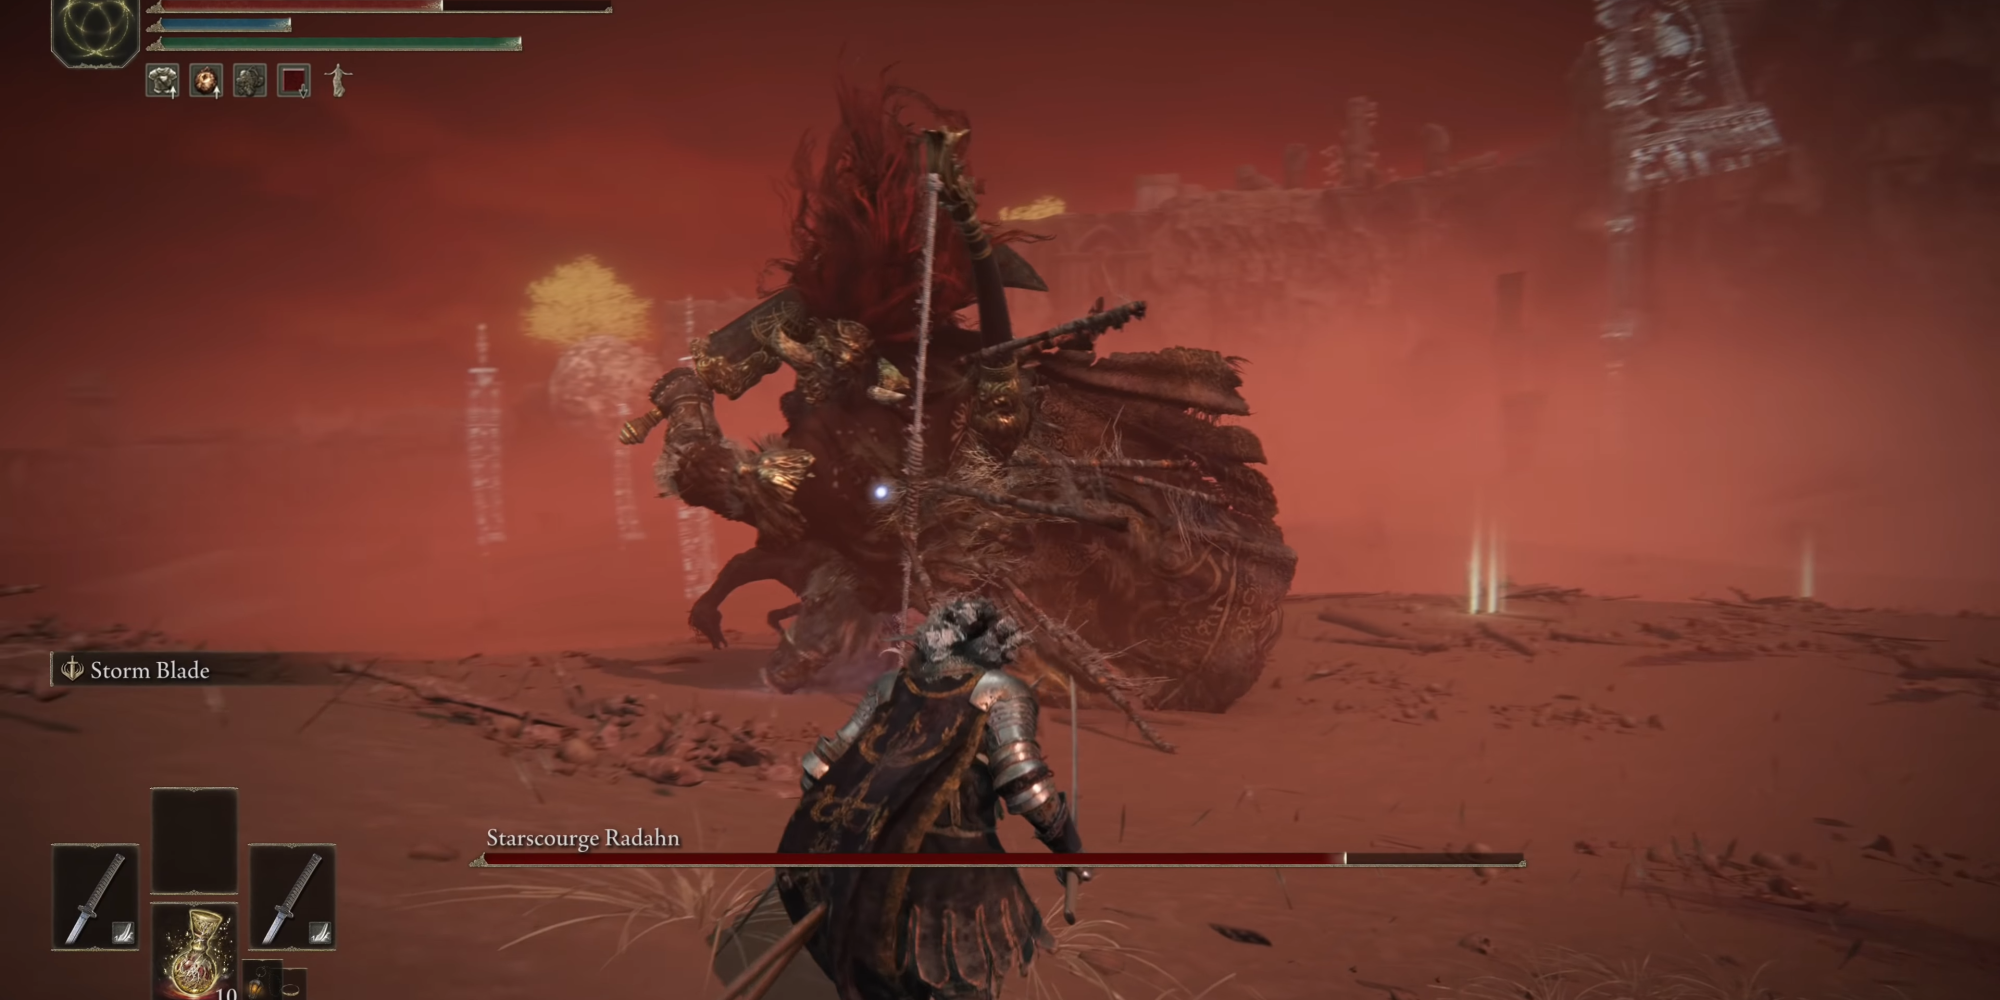 This image shows Starscourge Radahn using his charging slash attack in Elden Ring.